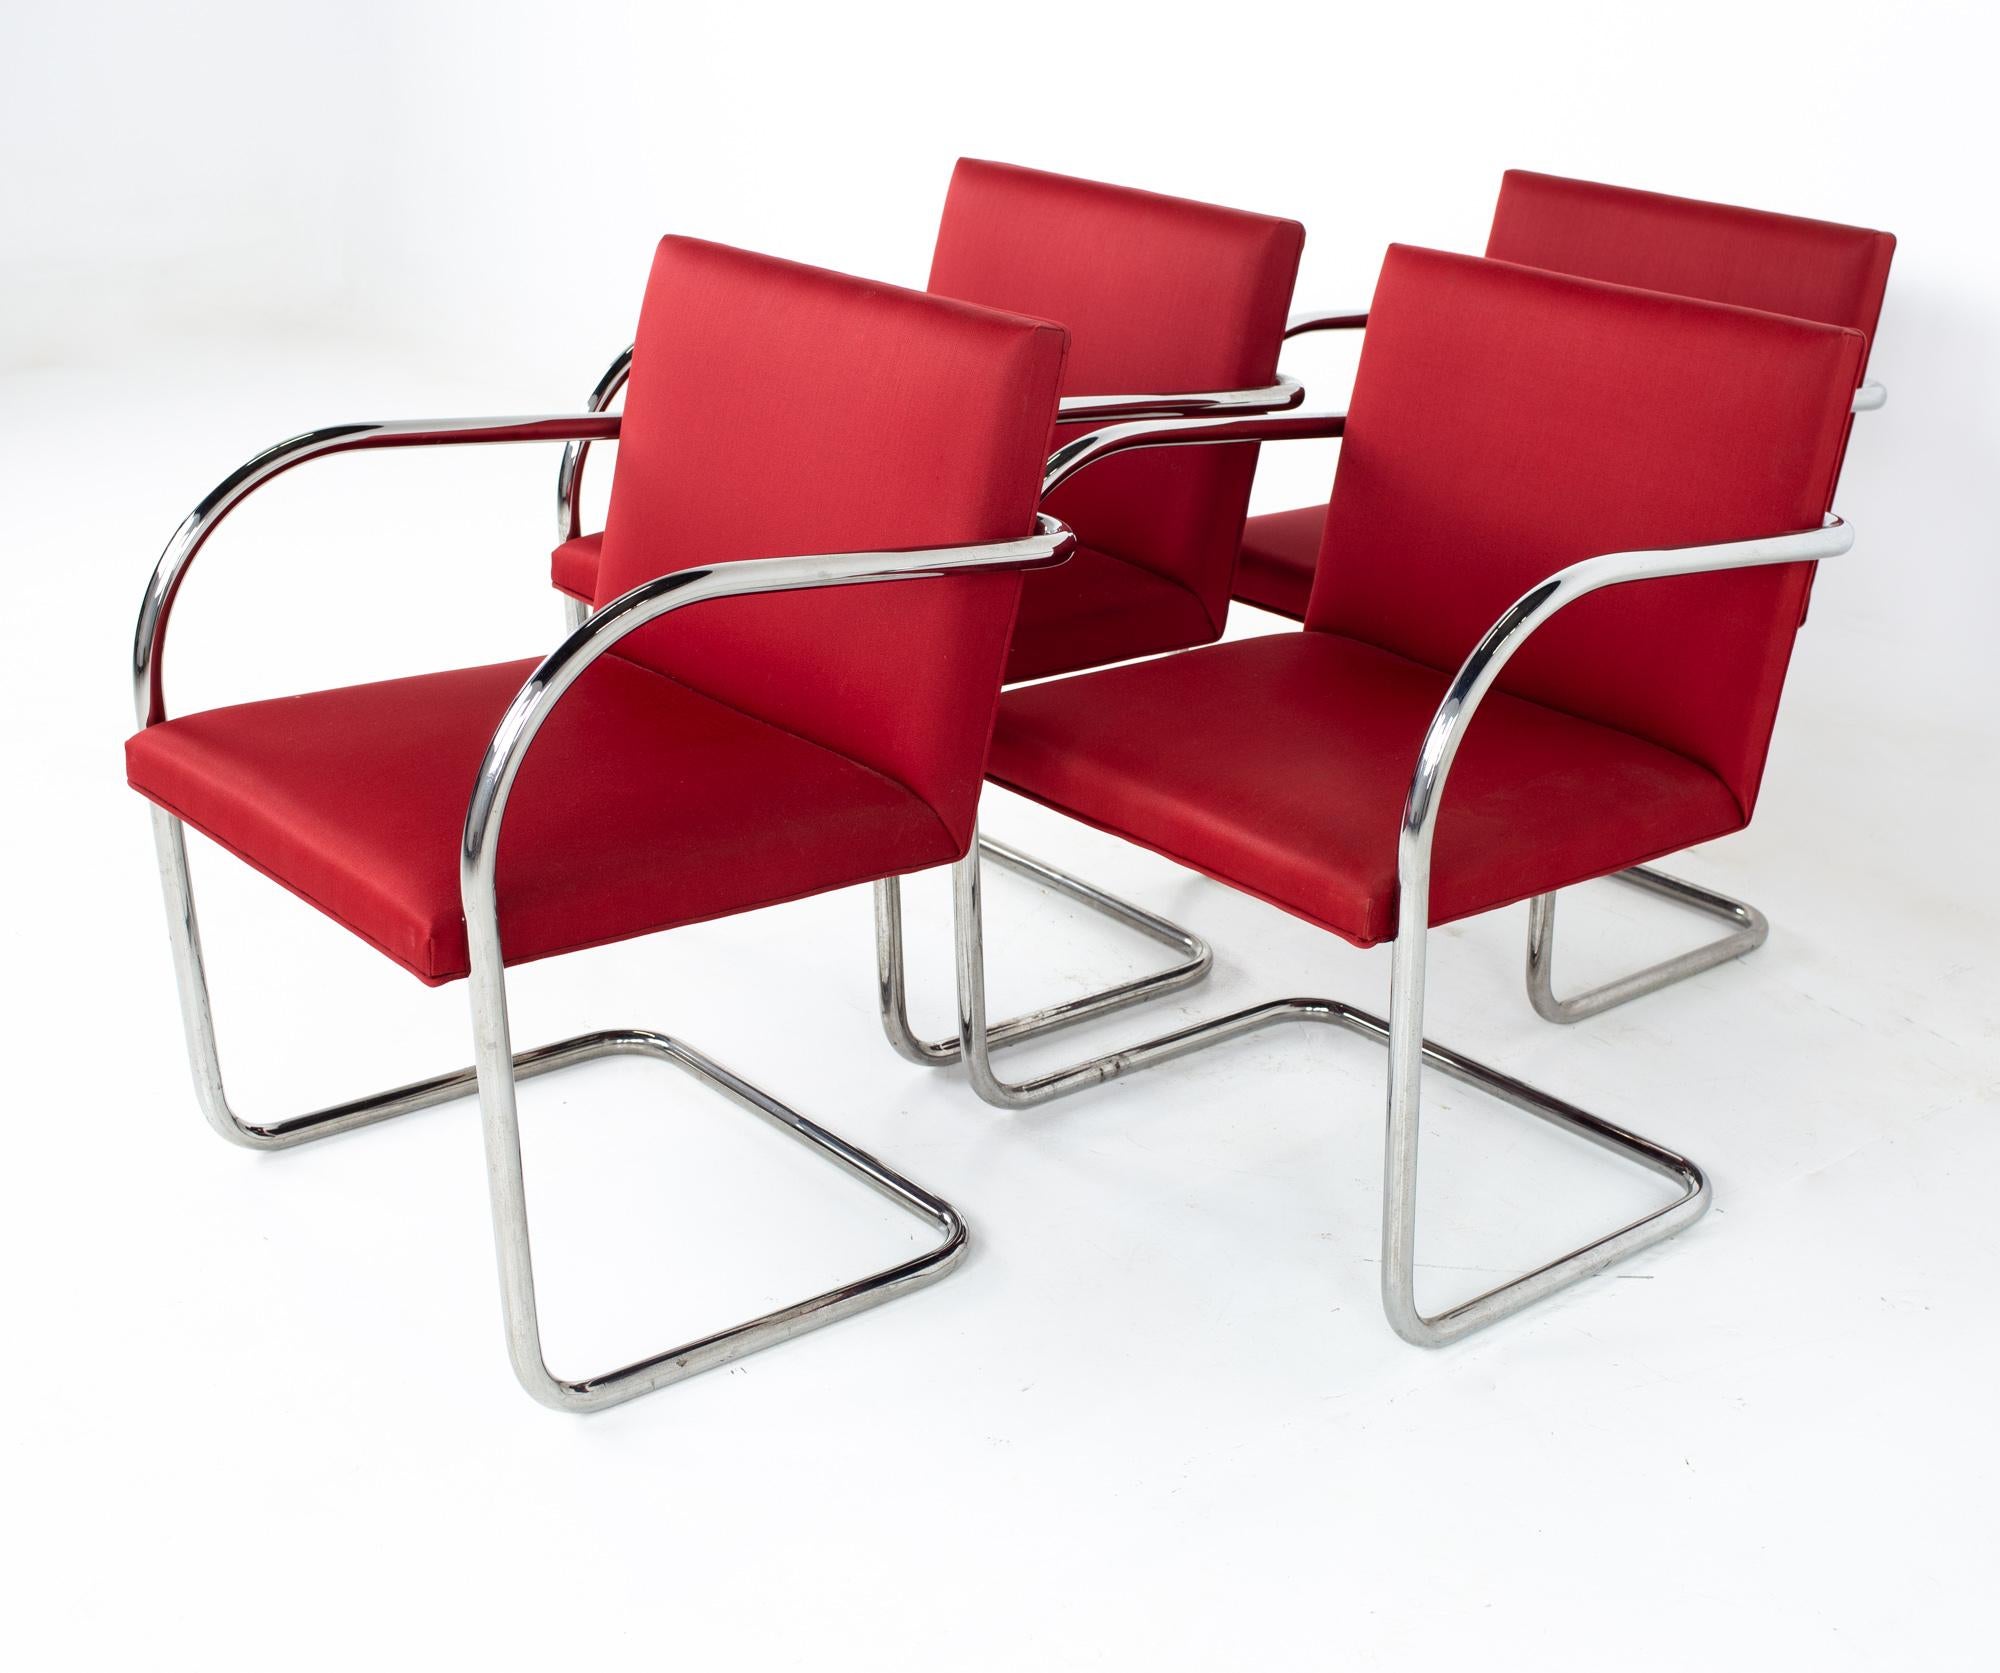 Mies Van Der Rohe for Knoll BRNO mid century red cantilever dining chairs - set of 4.
Each chair measures: 22 wide x 19 deep x 32 high, with a seat height of 17.5 inches and arm height of 26 inches

All pieces of furniture can be had in what we